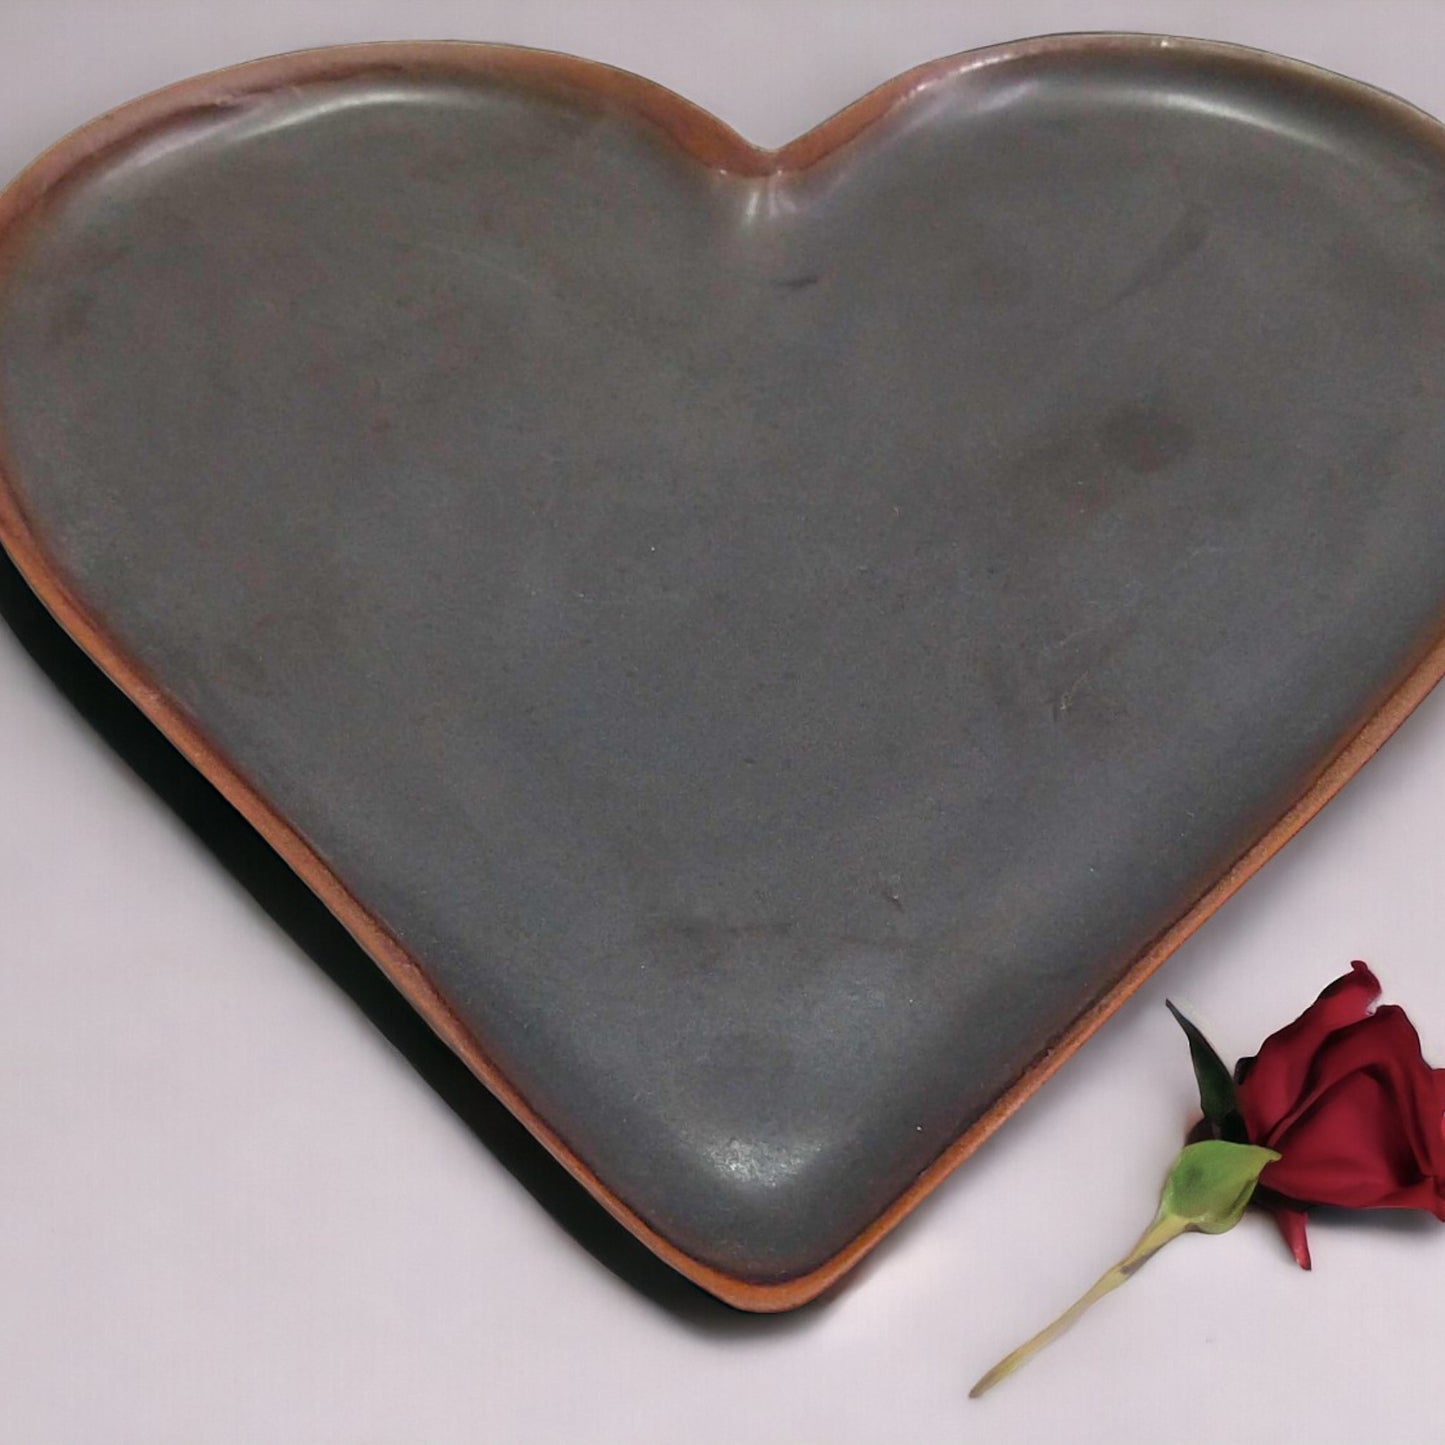 Chocolate brown ceramic heart shaped appetizer dish